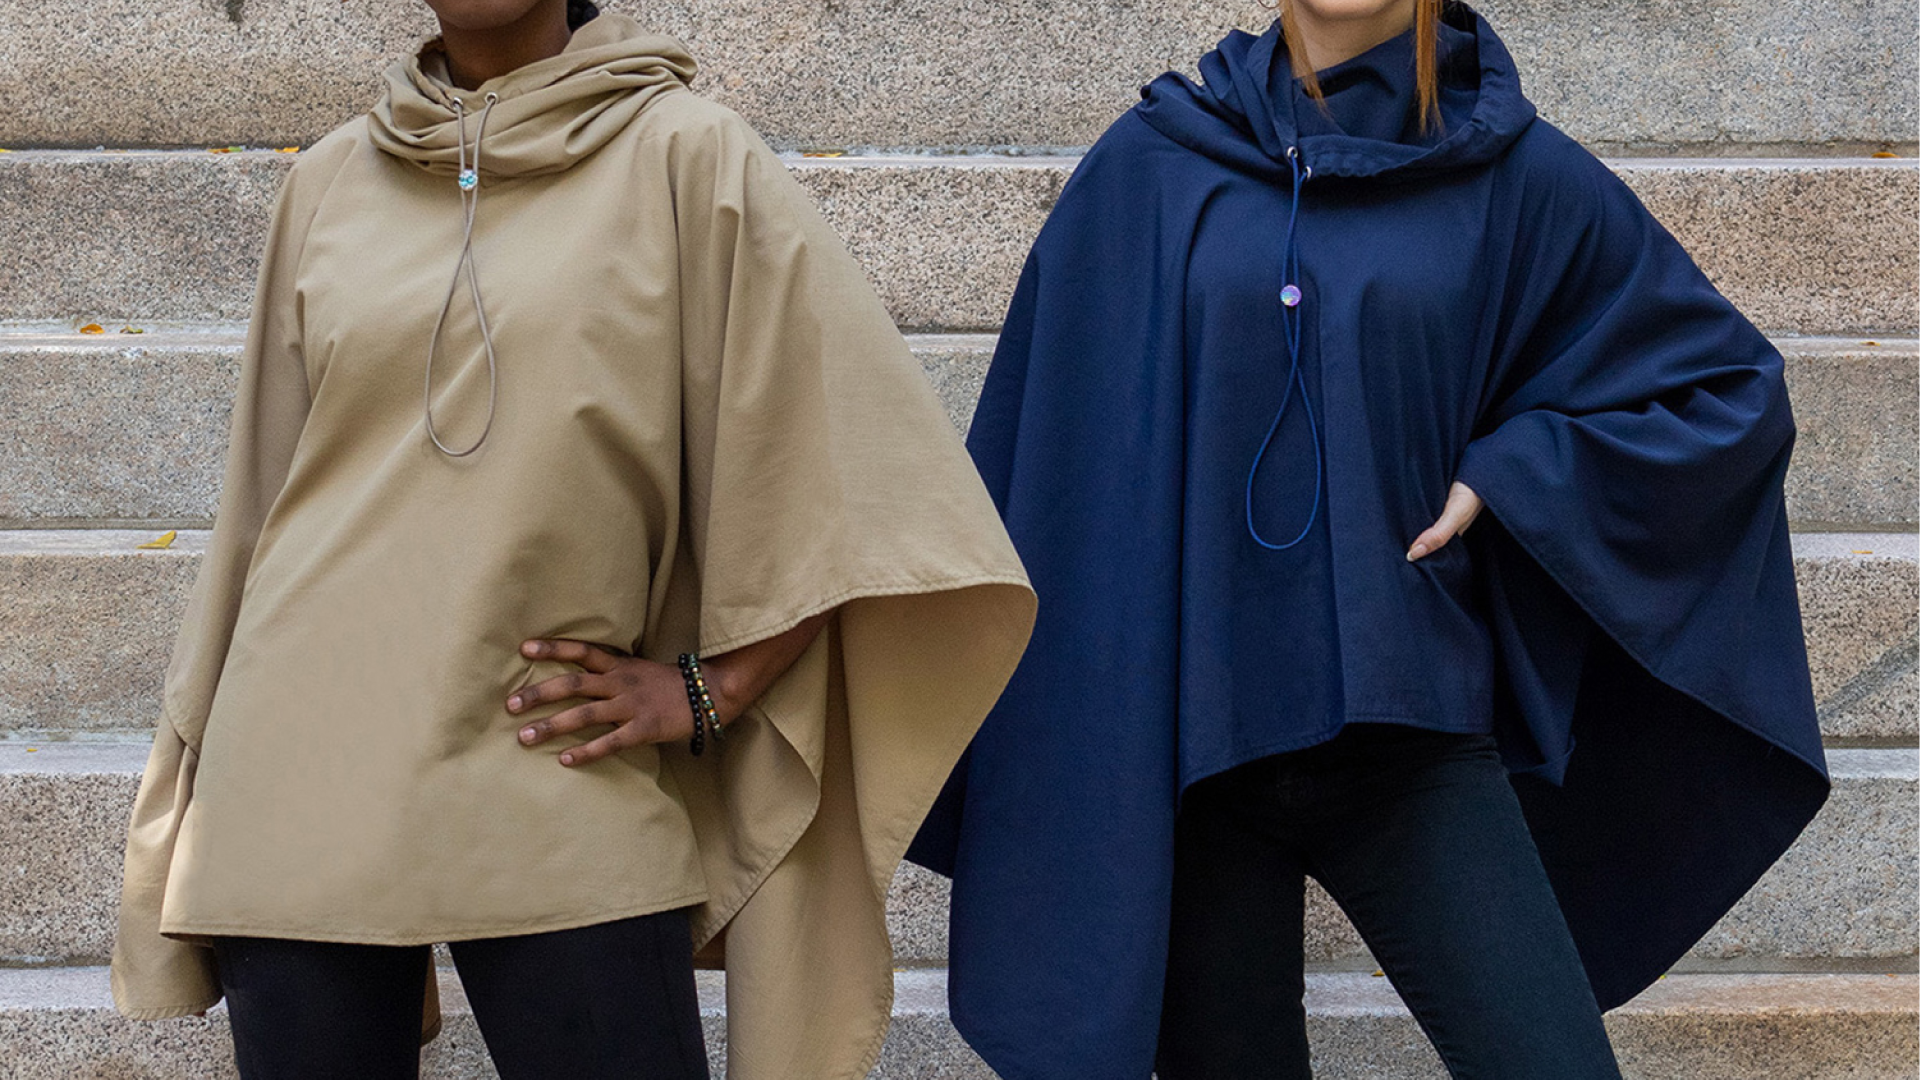 Stay dry in Style with our new Rain Poncho